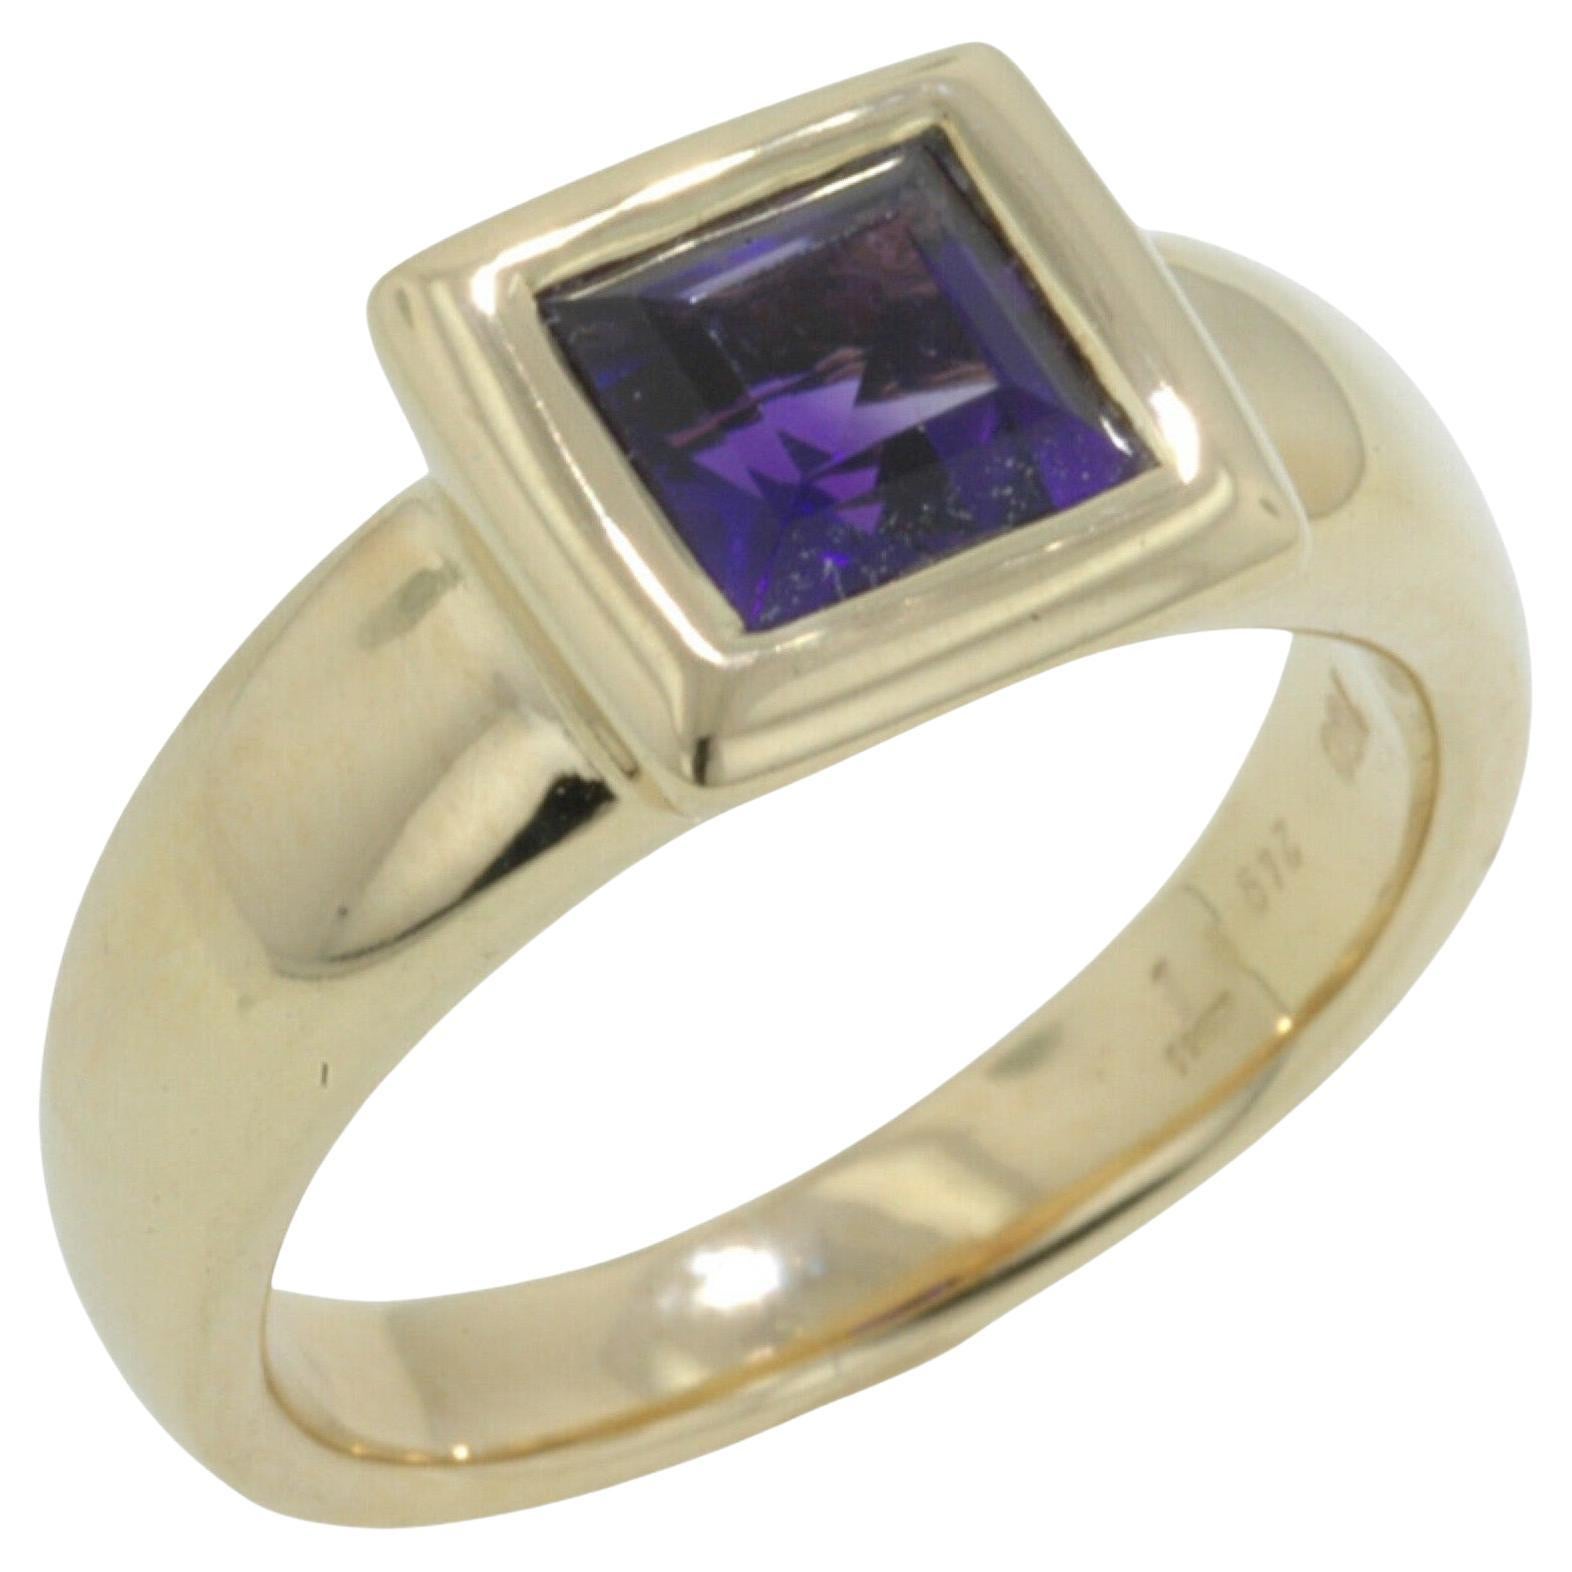 Hammer & Sohne 18K Yellow Gold Ring with Faceted Square Cut Amethyst